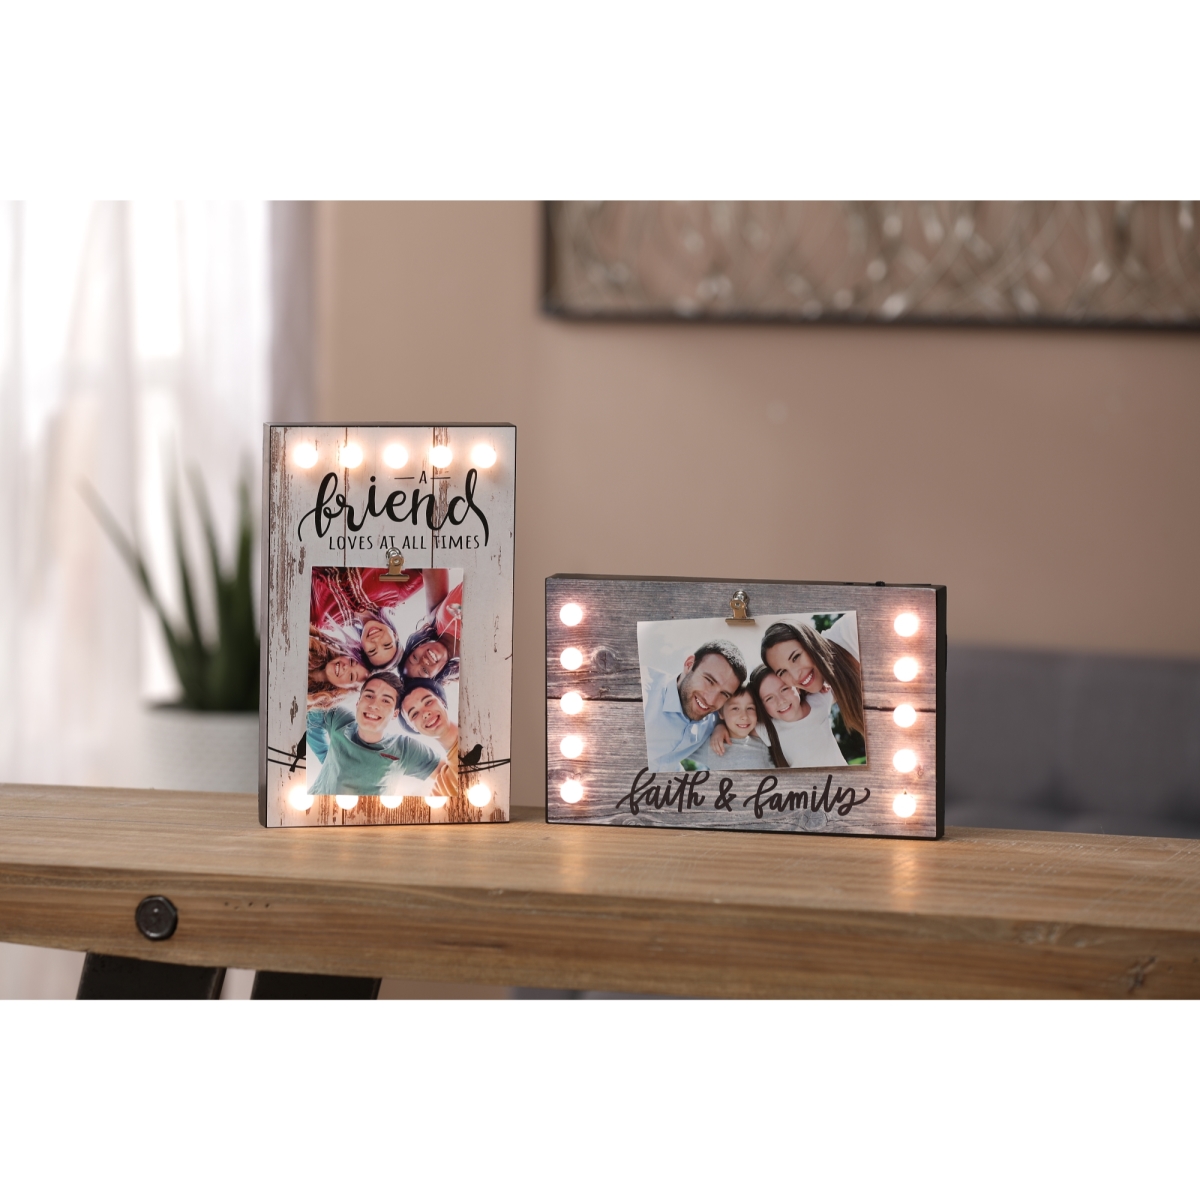 Whd673 Friends & Family Picture Frame With Led Lights - 2 Piece